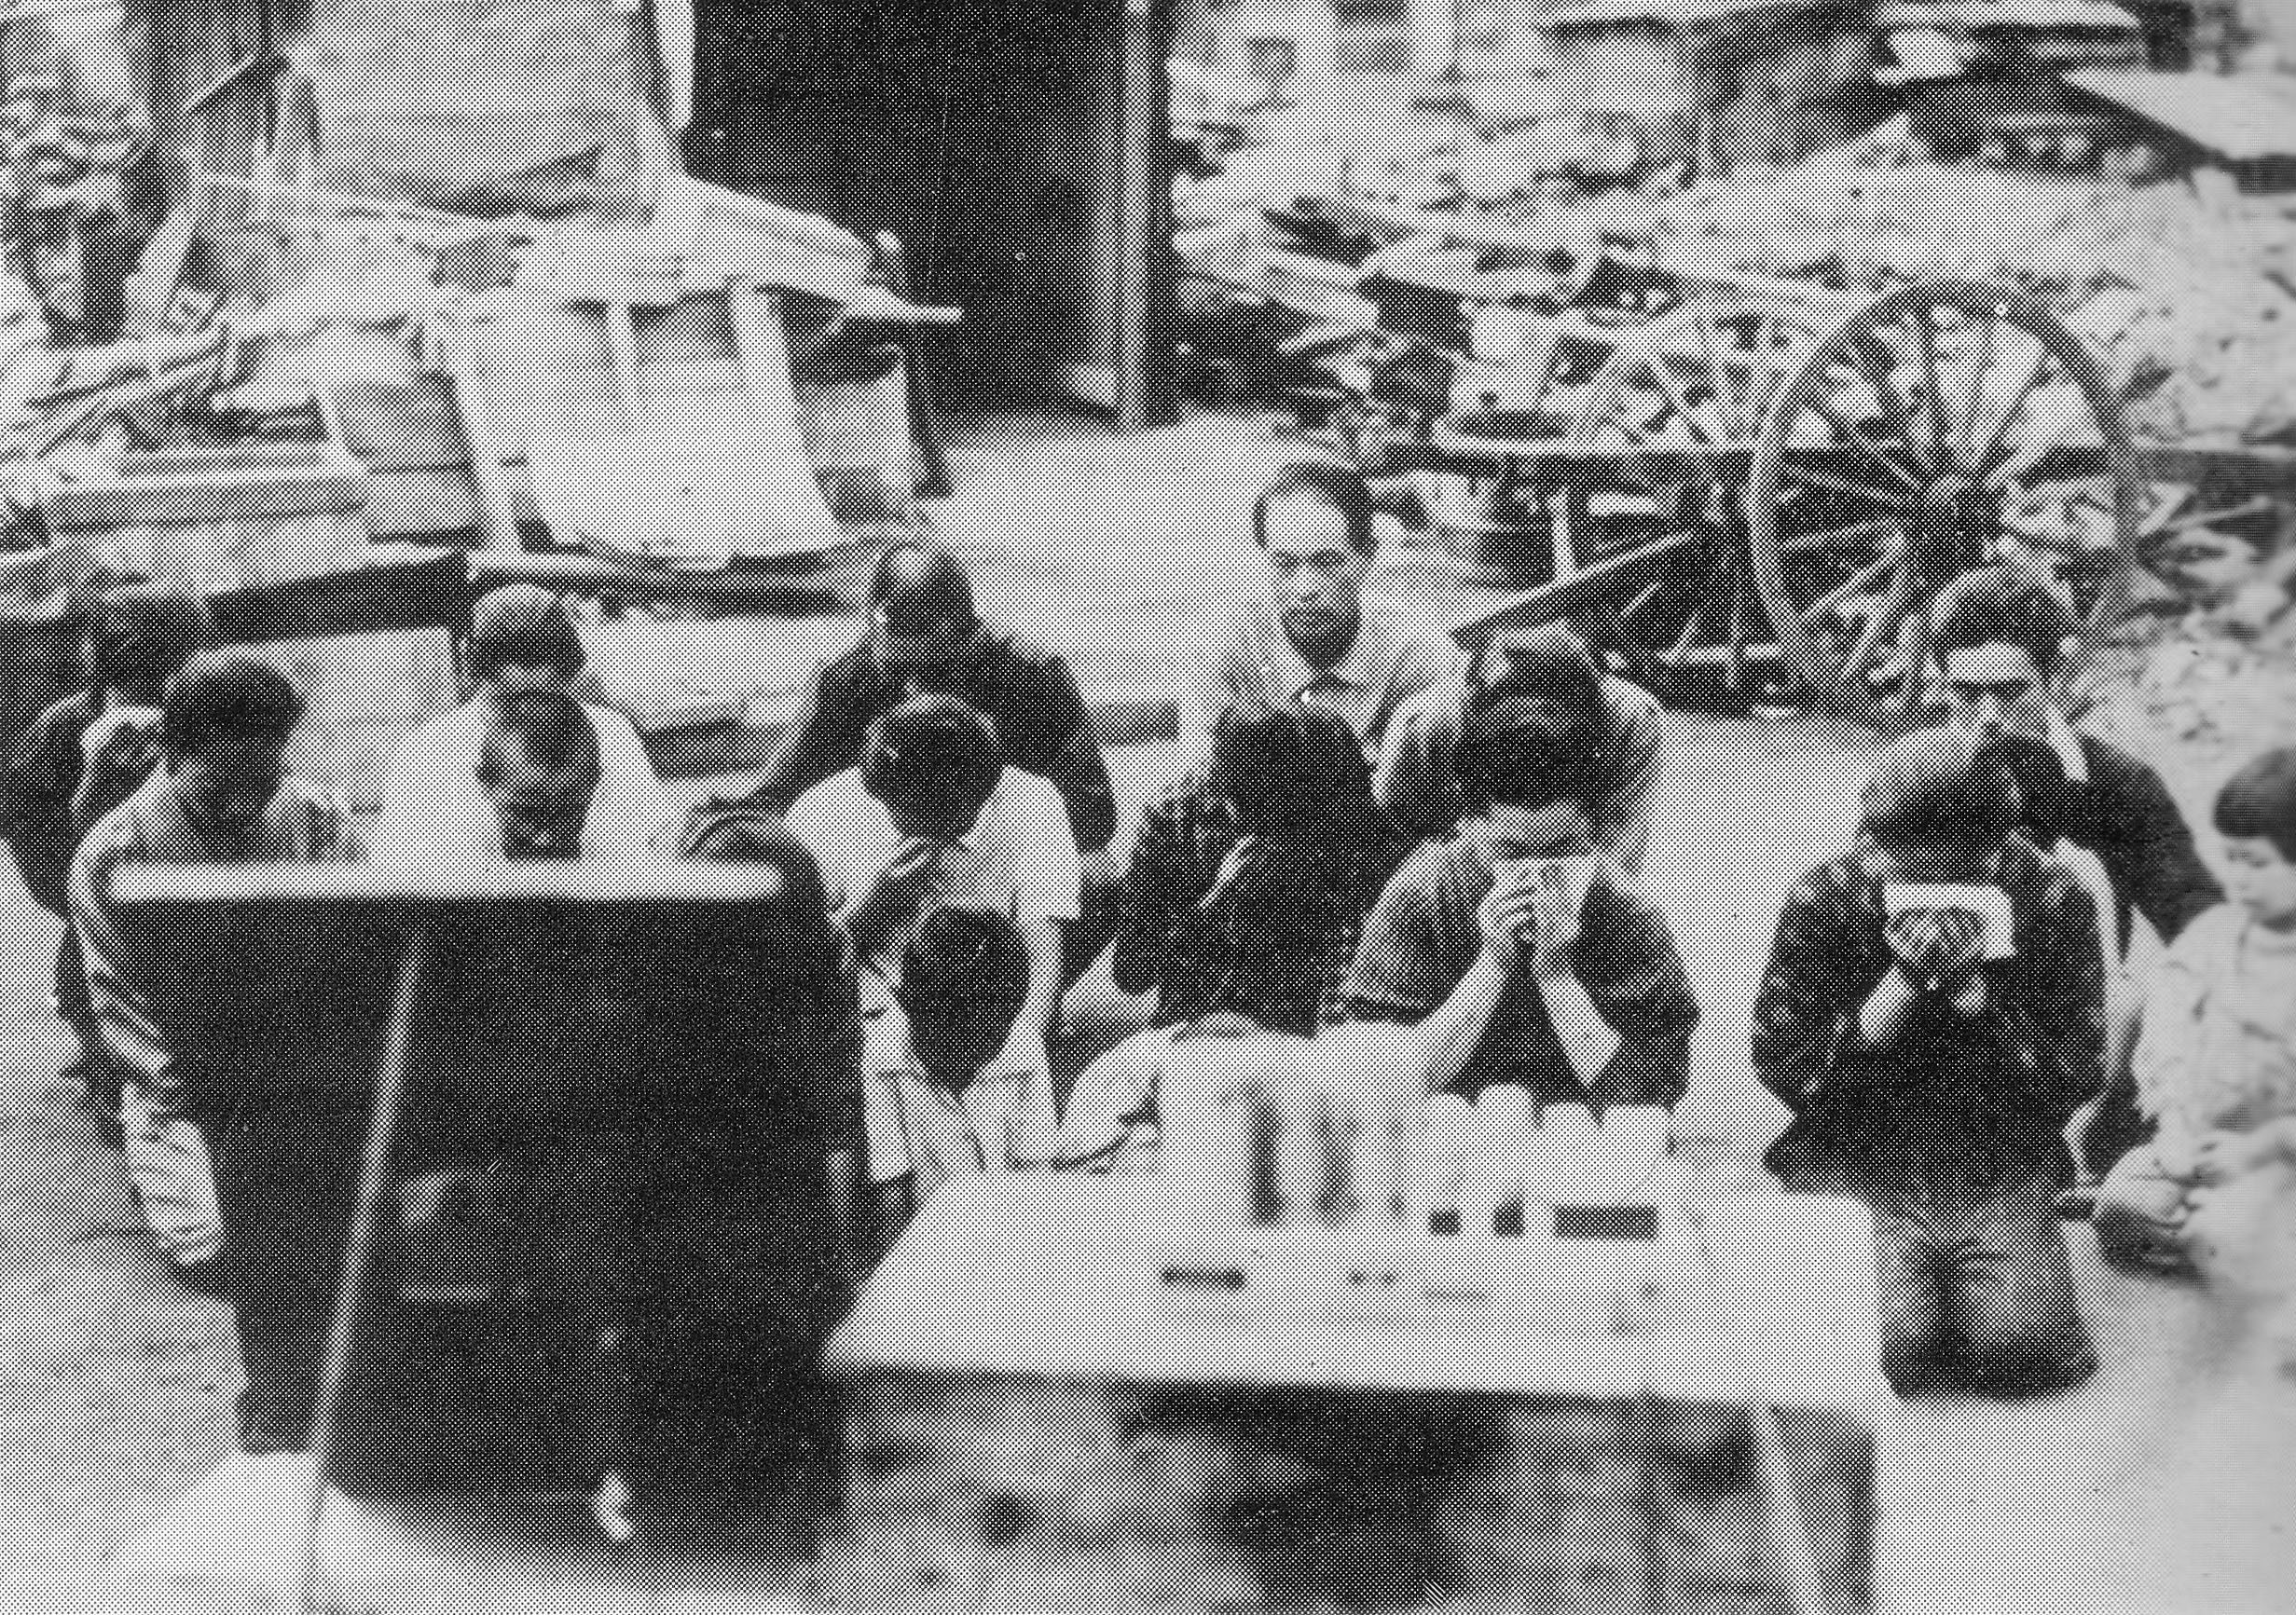 Japanese civilians listening to the Imperial Rescript of Surrender, 15 Aug 1945